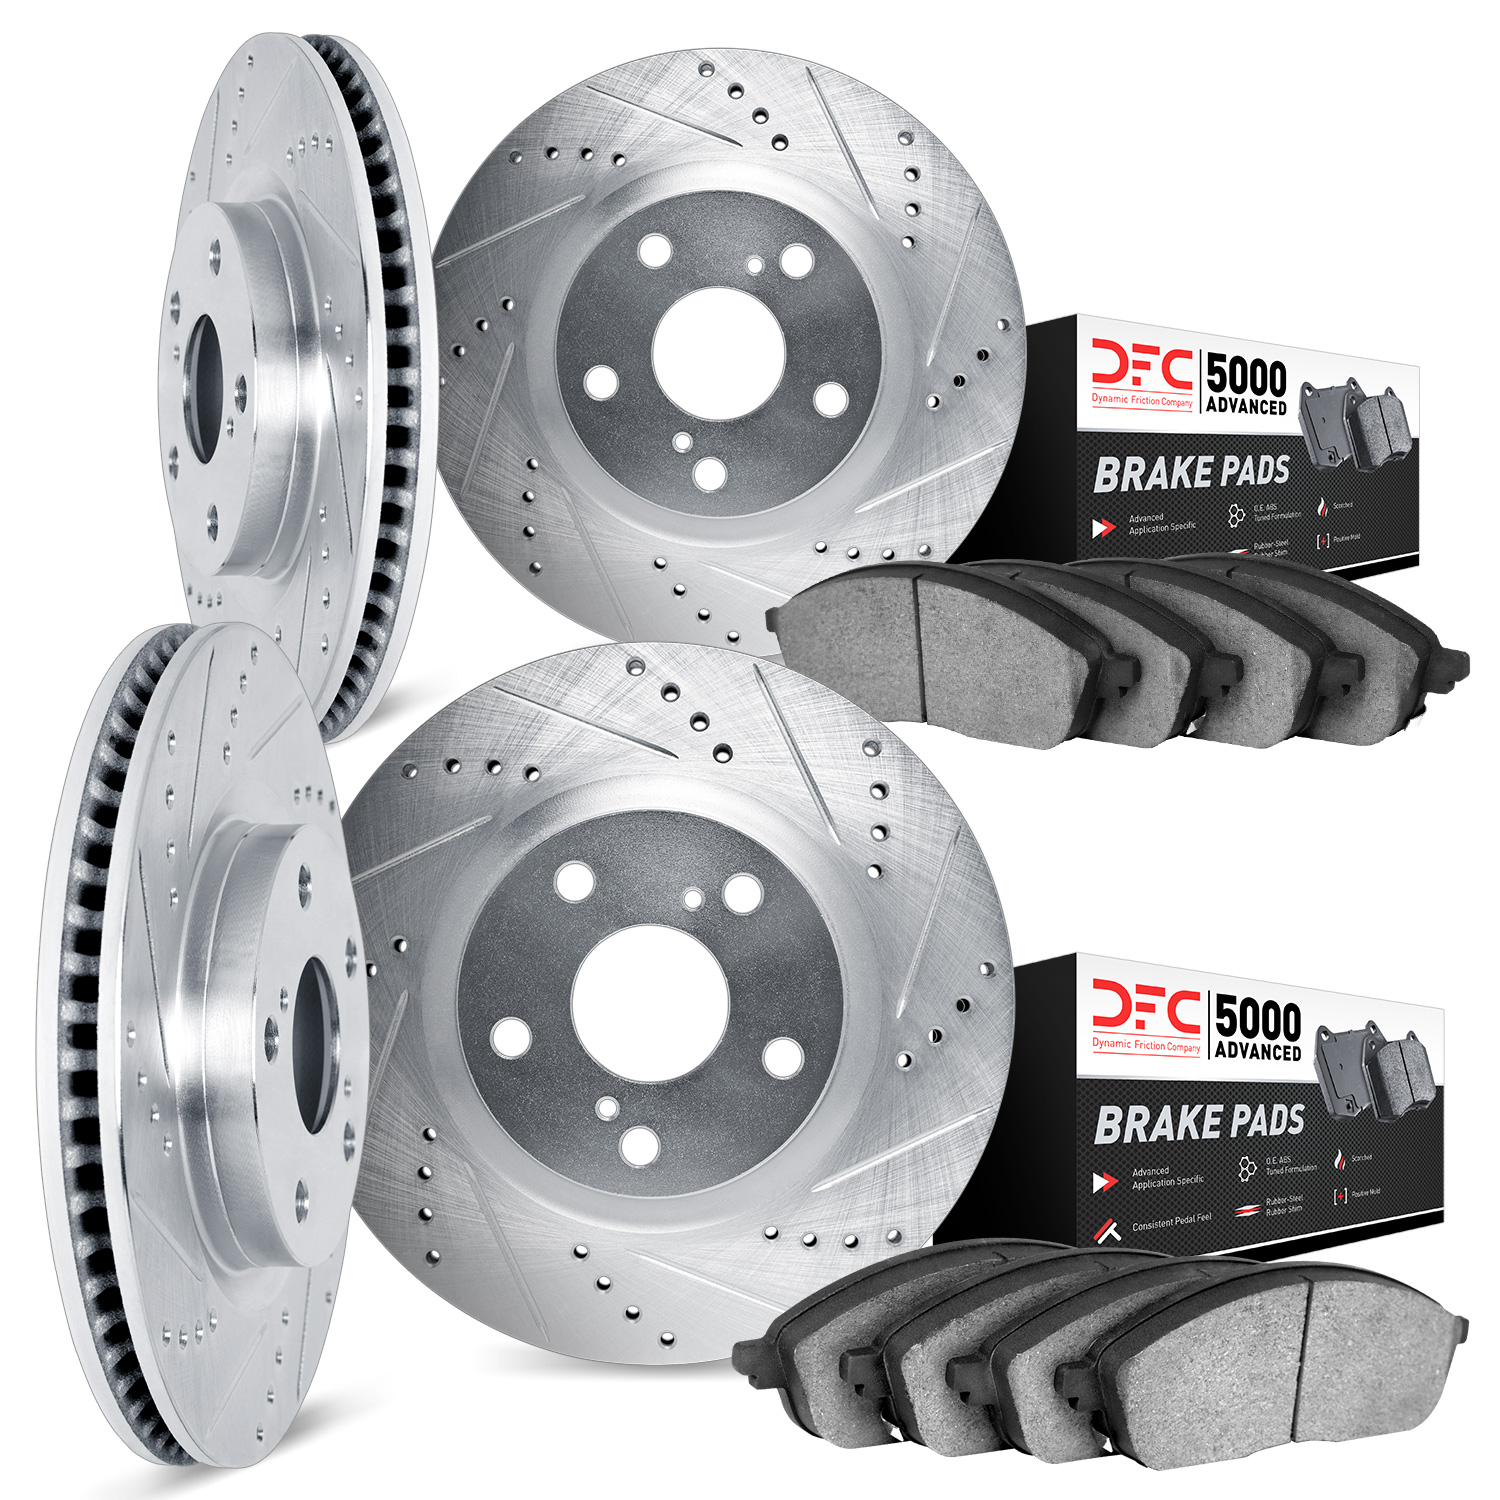 7504-73010 Drilled/Slotted Brake Rotors w/5000 Advanced Brake Pads Kit [Silver], Fits Select Audi/Volkswagen, Position: Front an